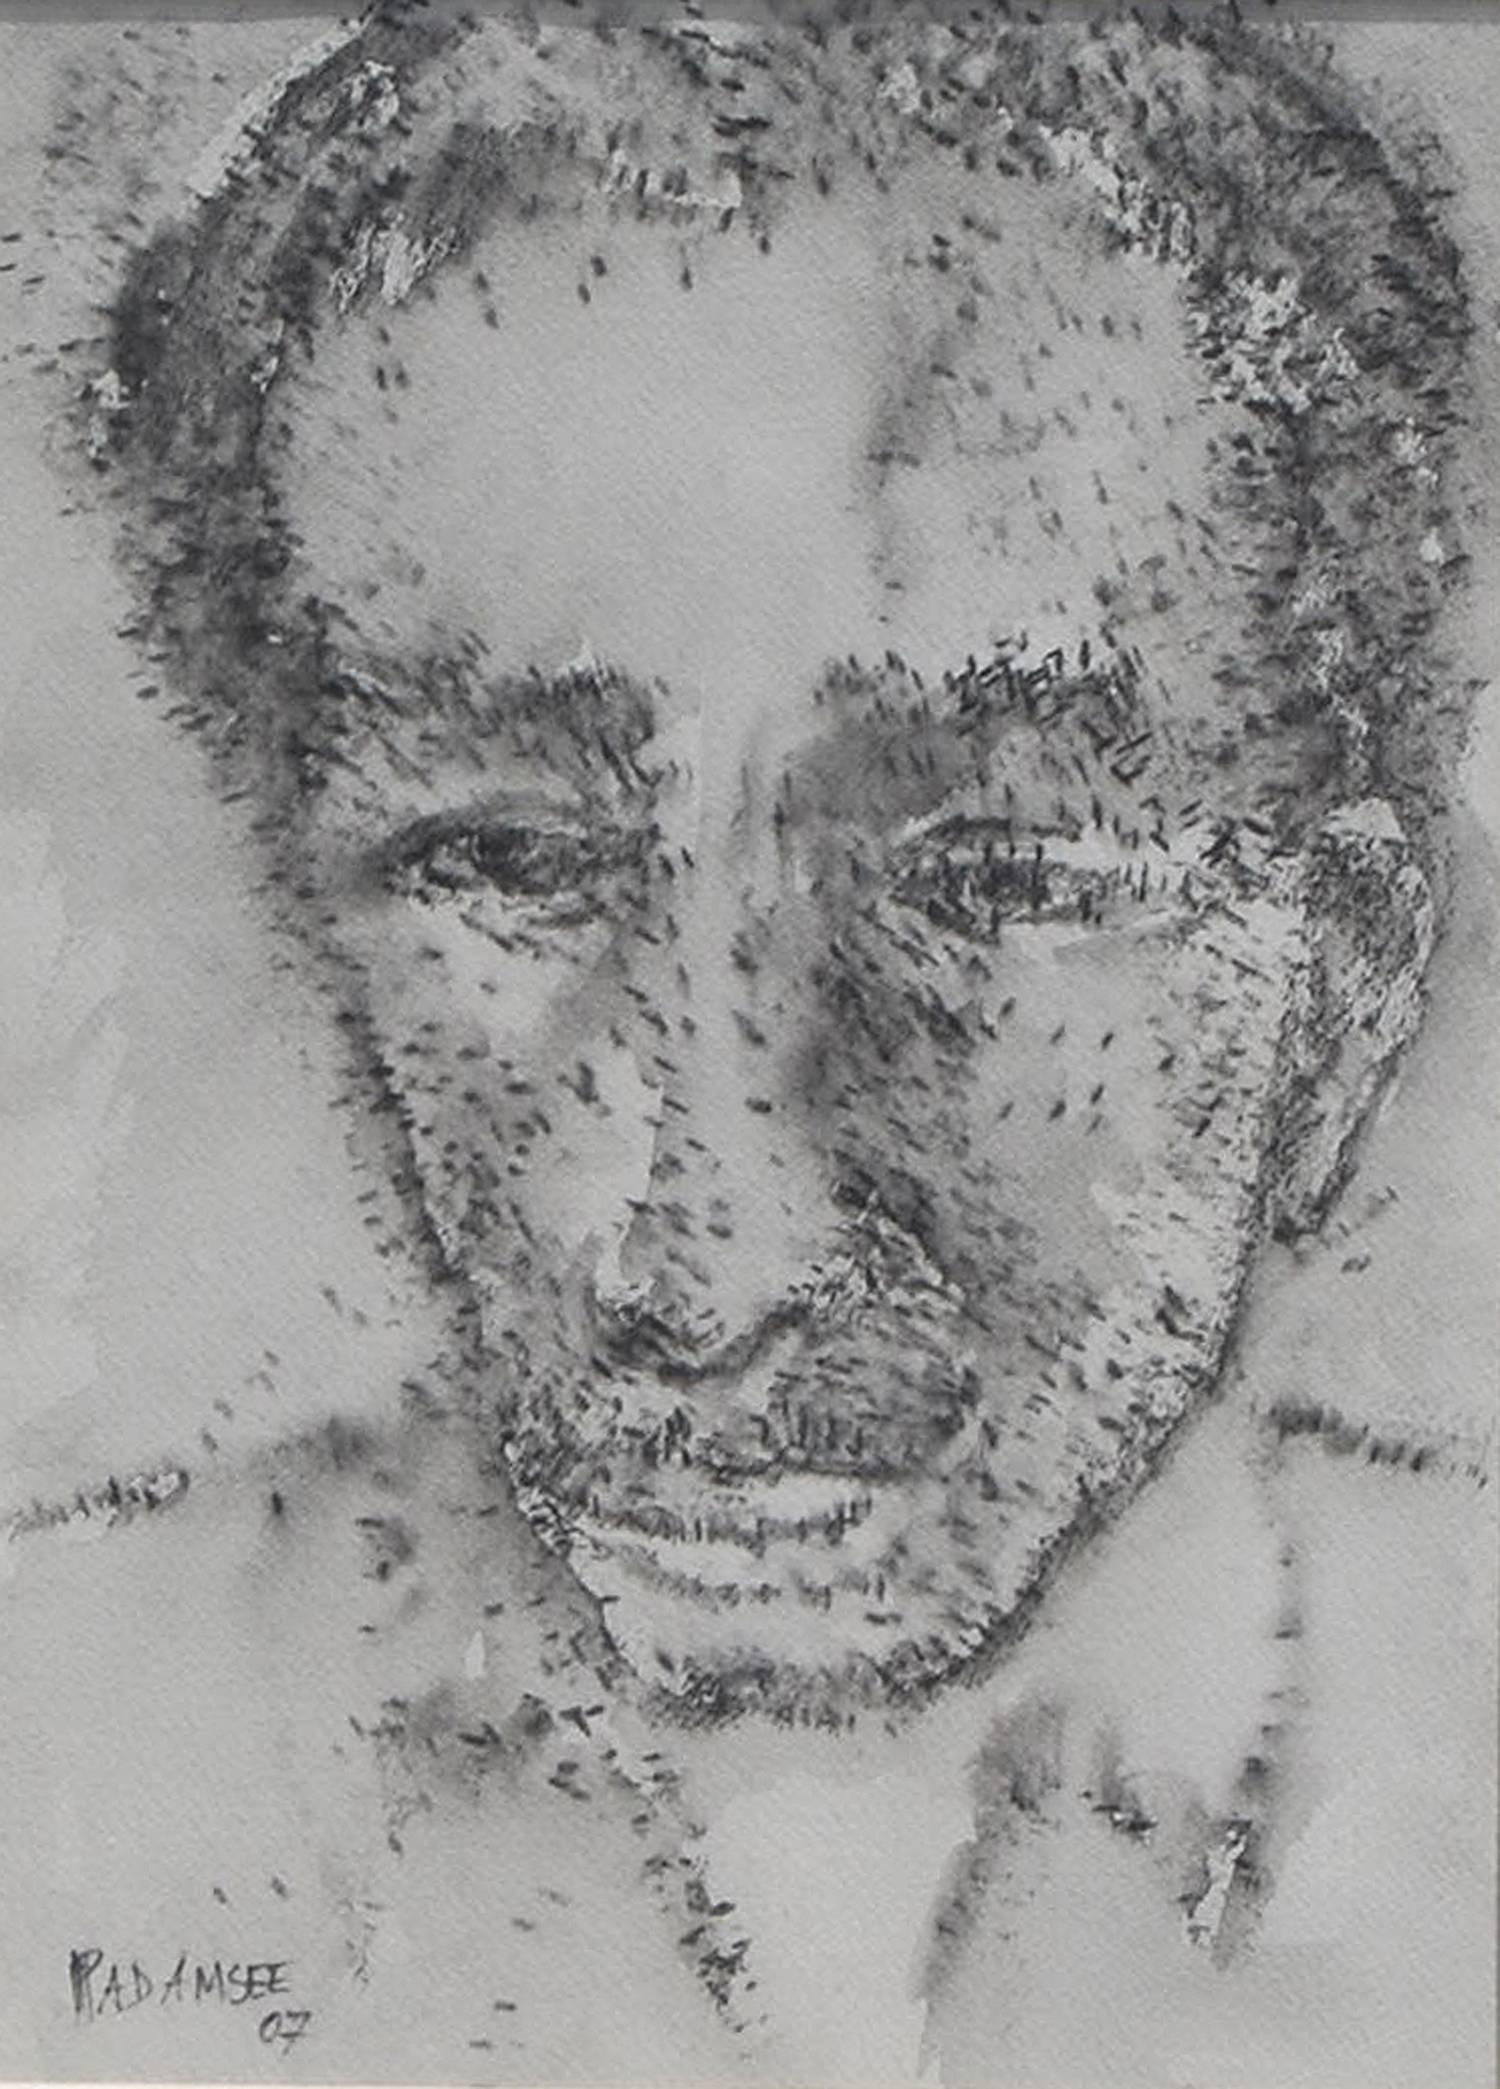 Potrait, A Man, Chinese Ink Paper, Black-White by Padma Bhushan Artist